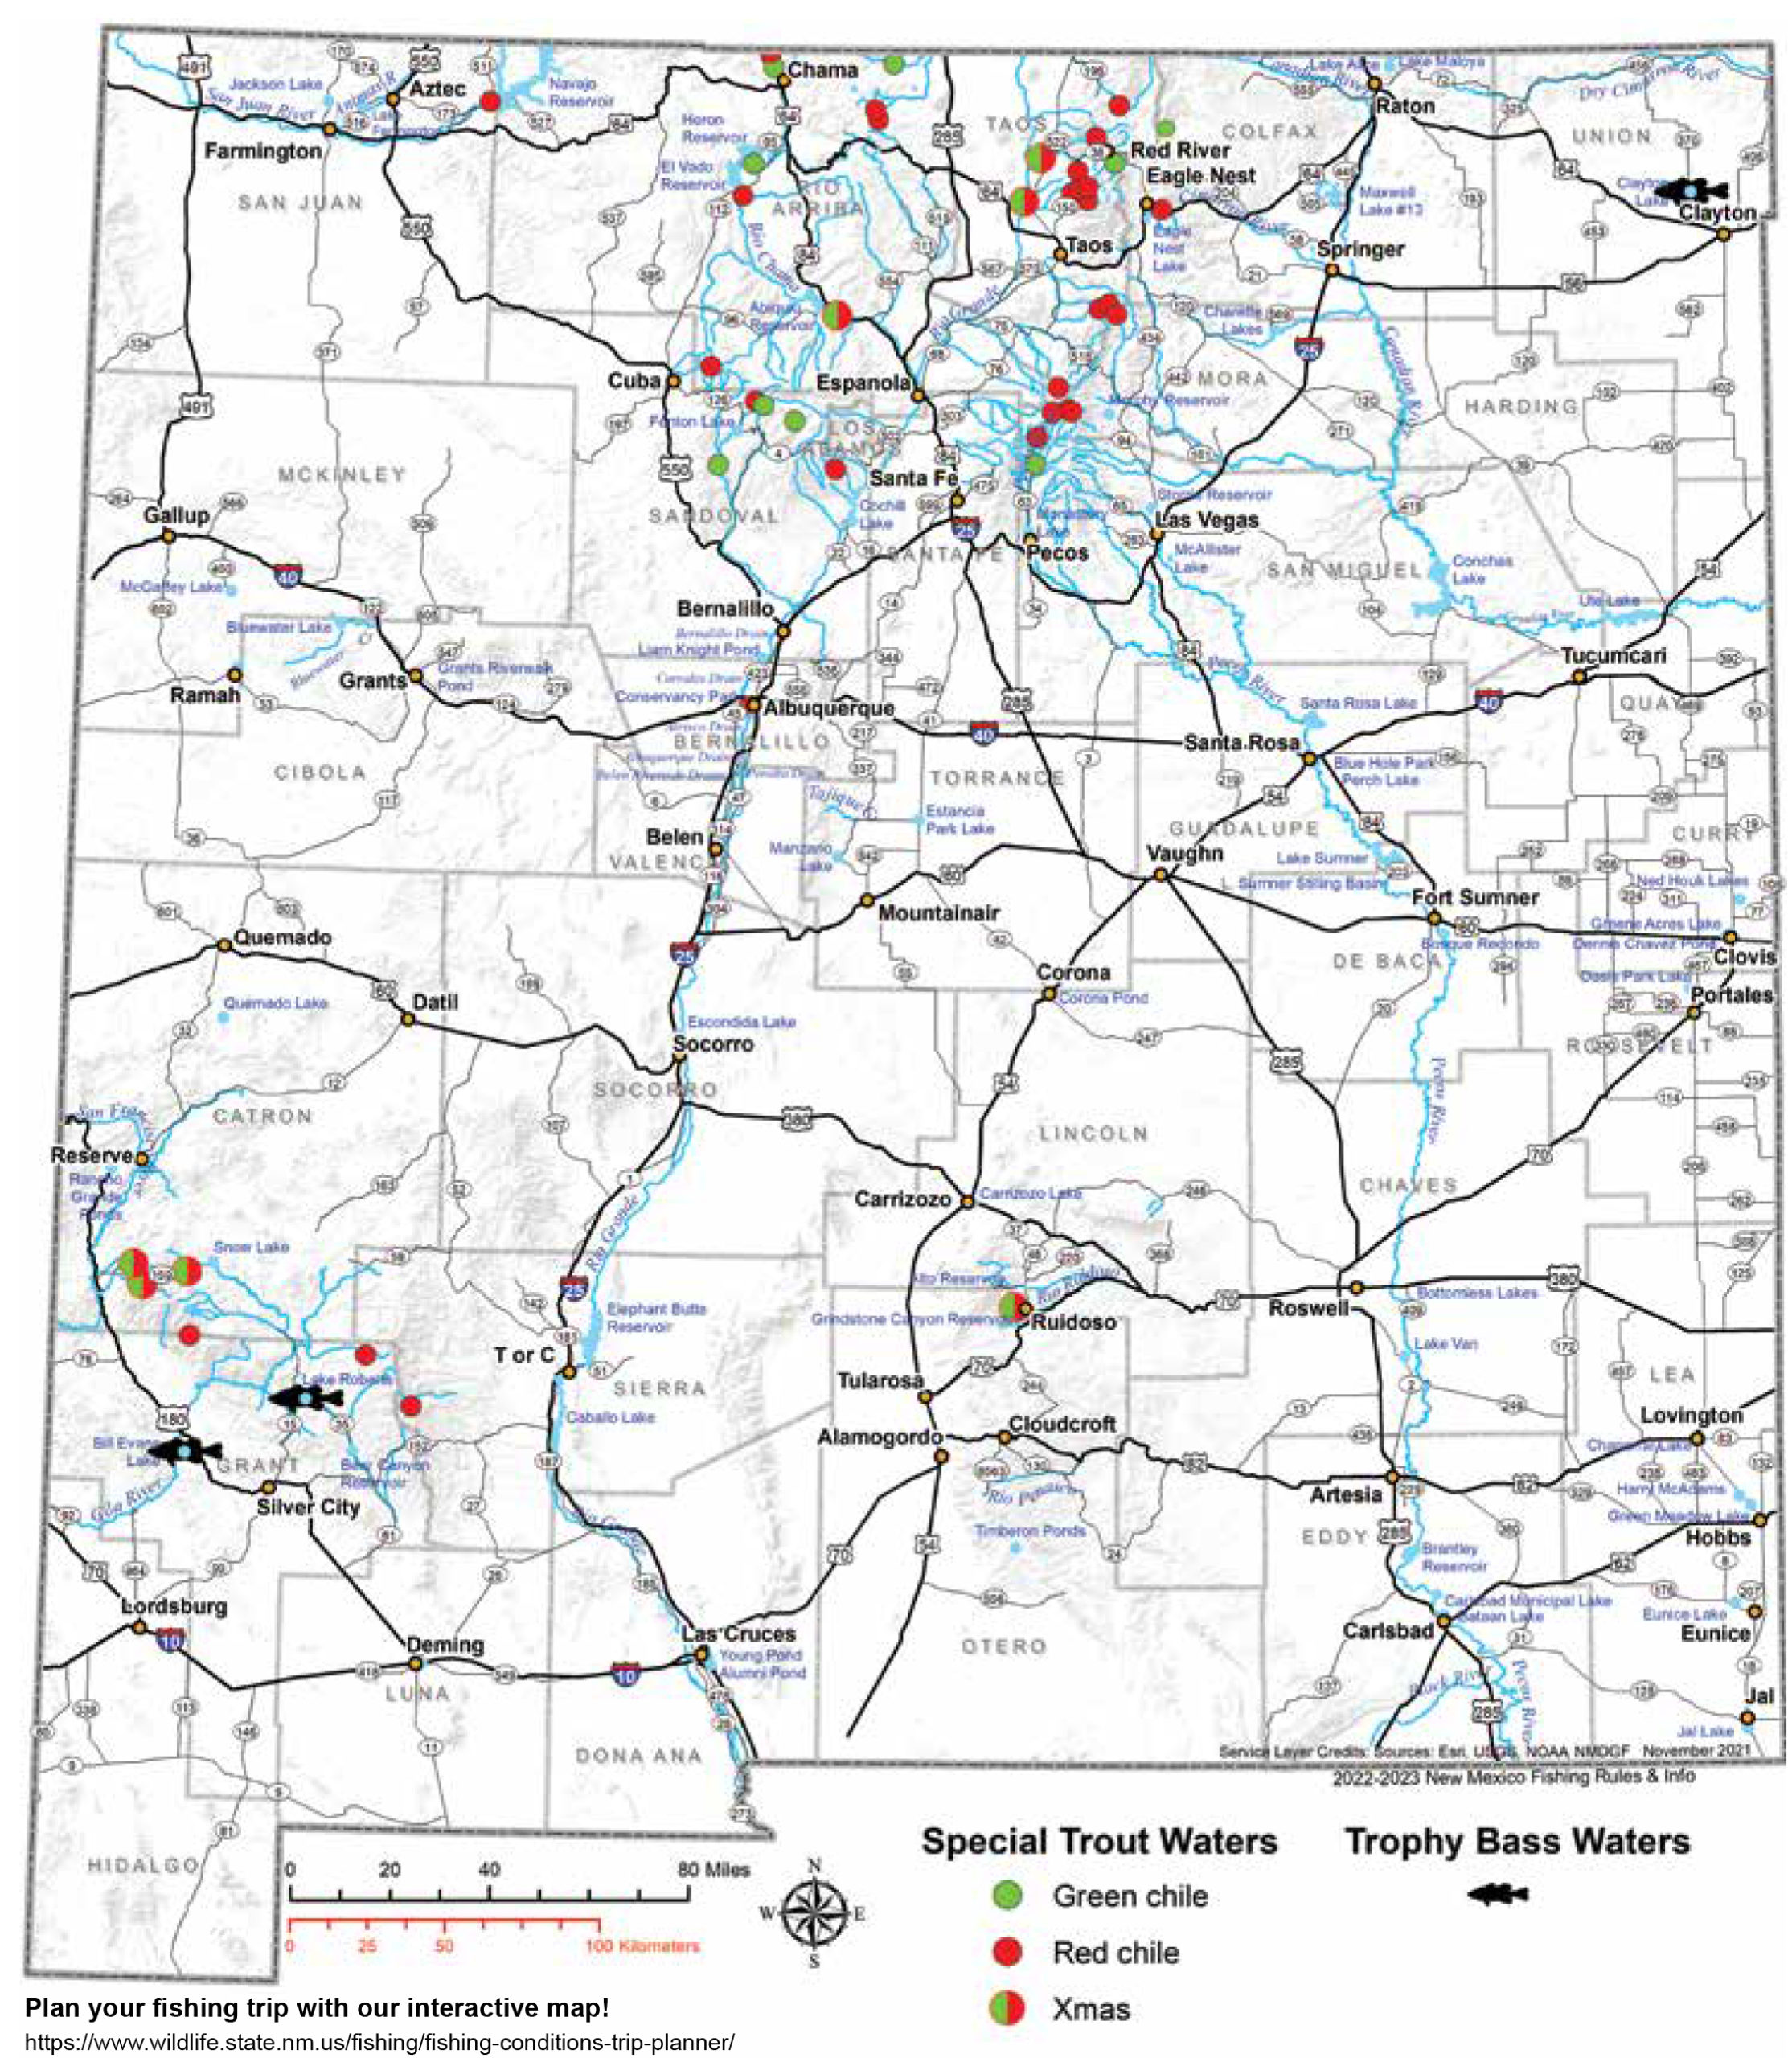 Water Access & Maps - New Mexico Department of Game & Fish